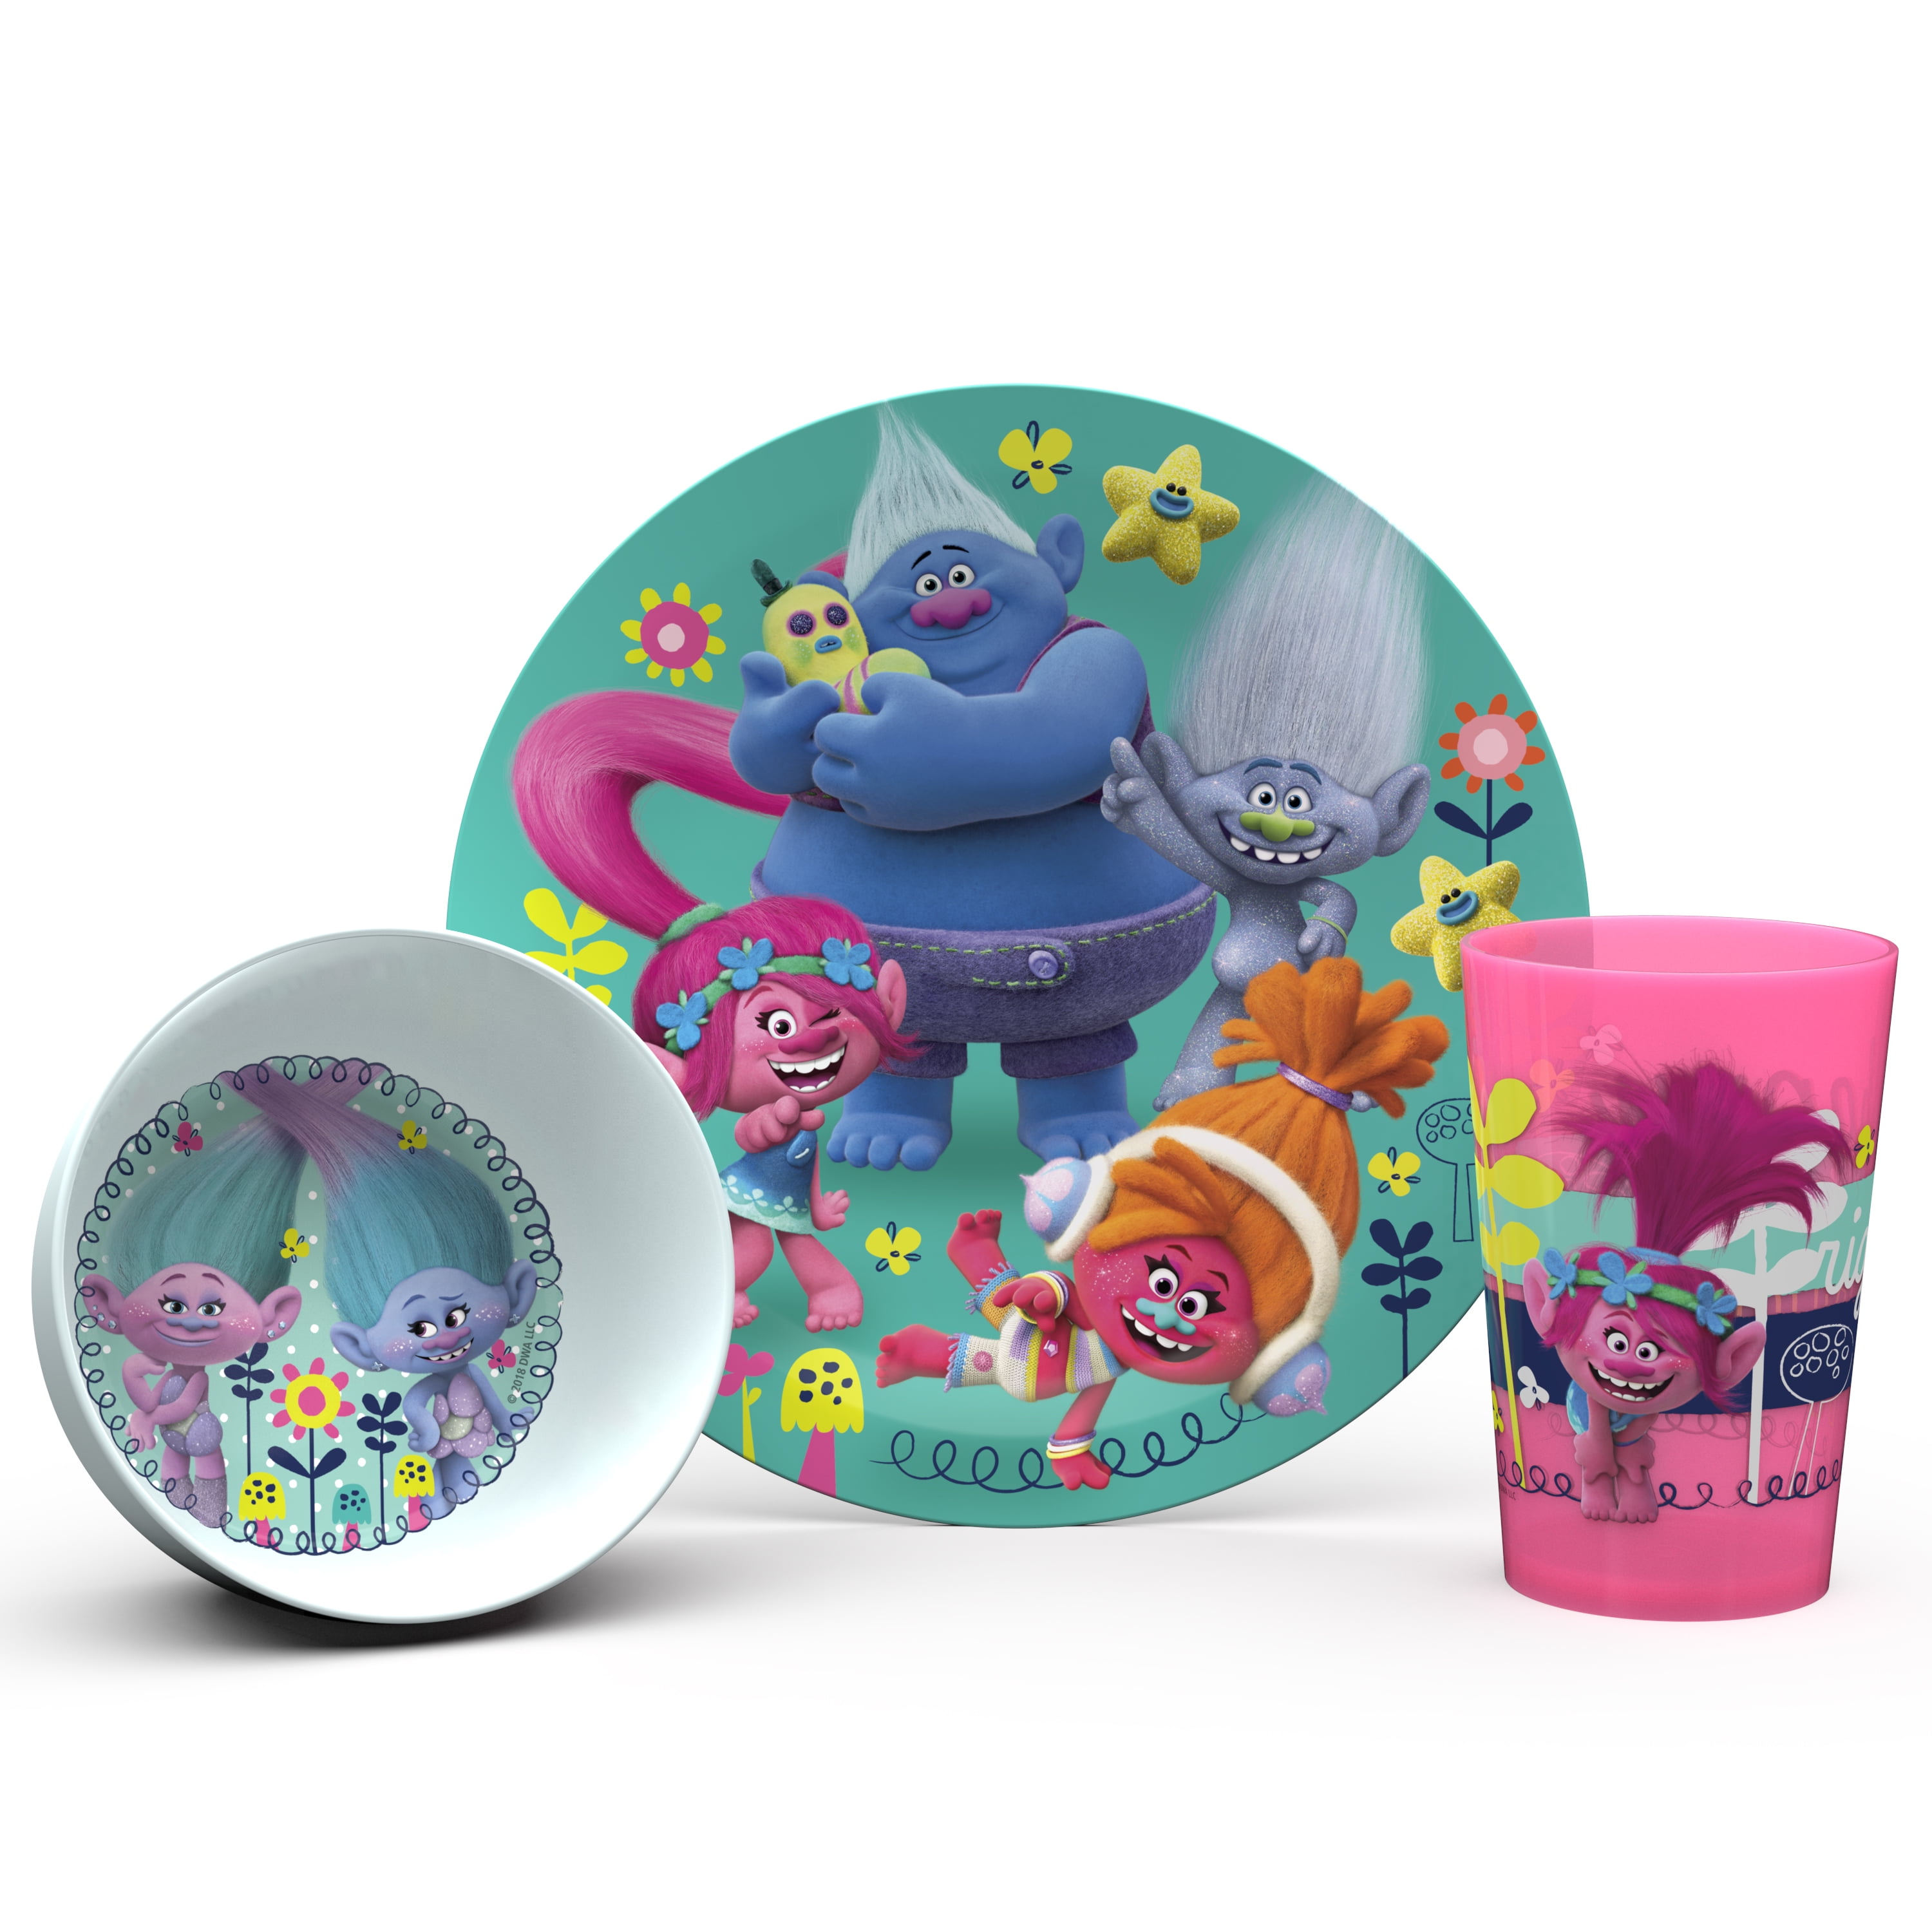 Trolls Party Plates for sale